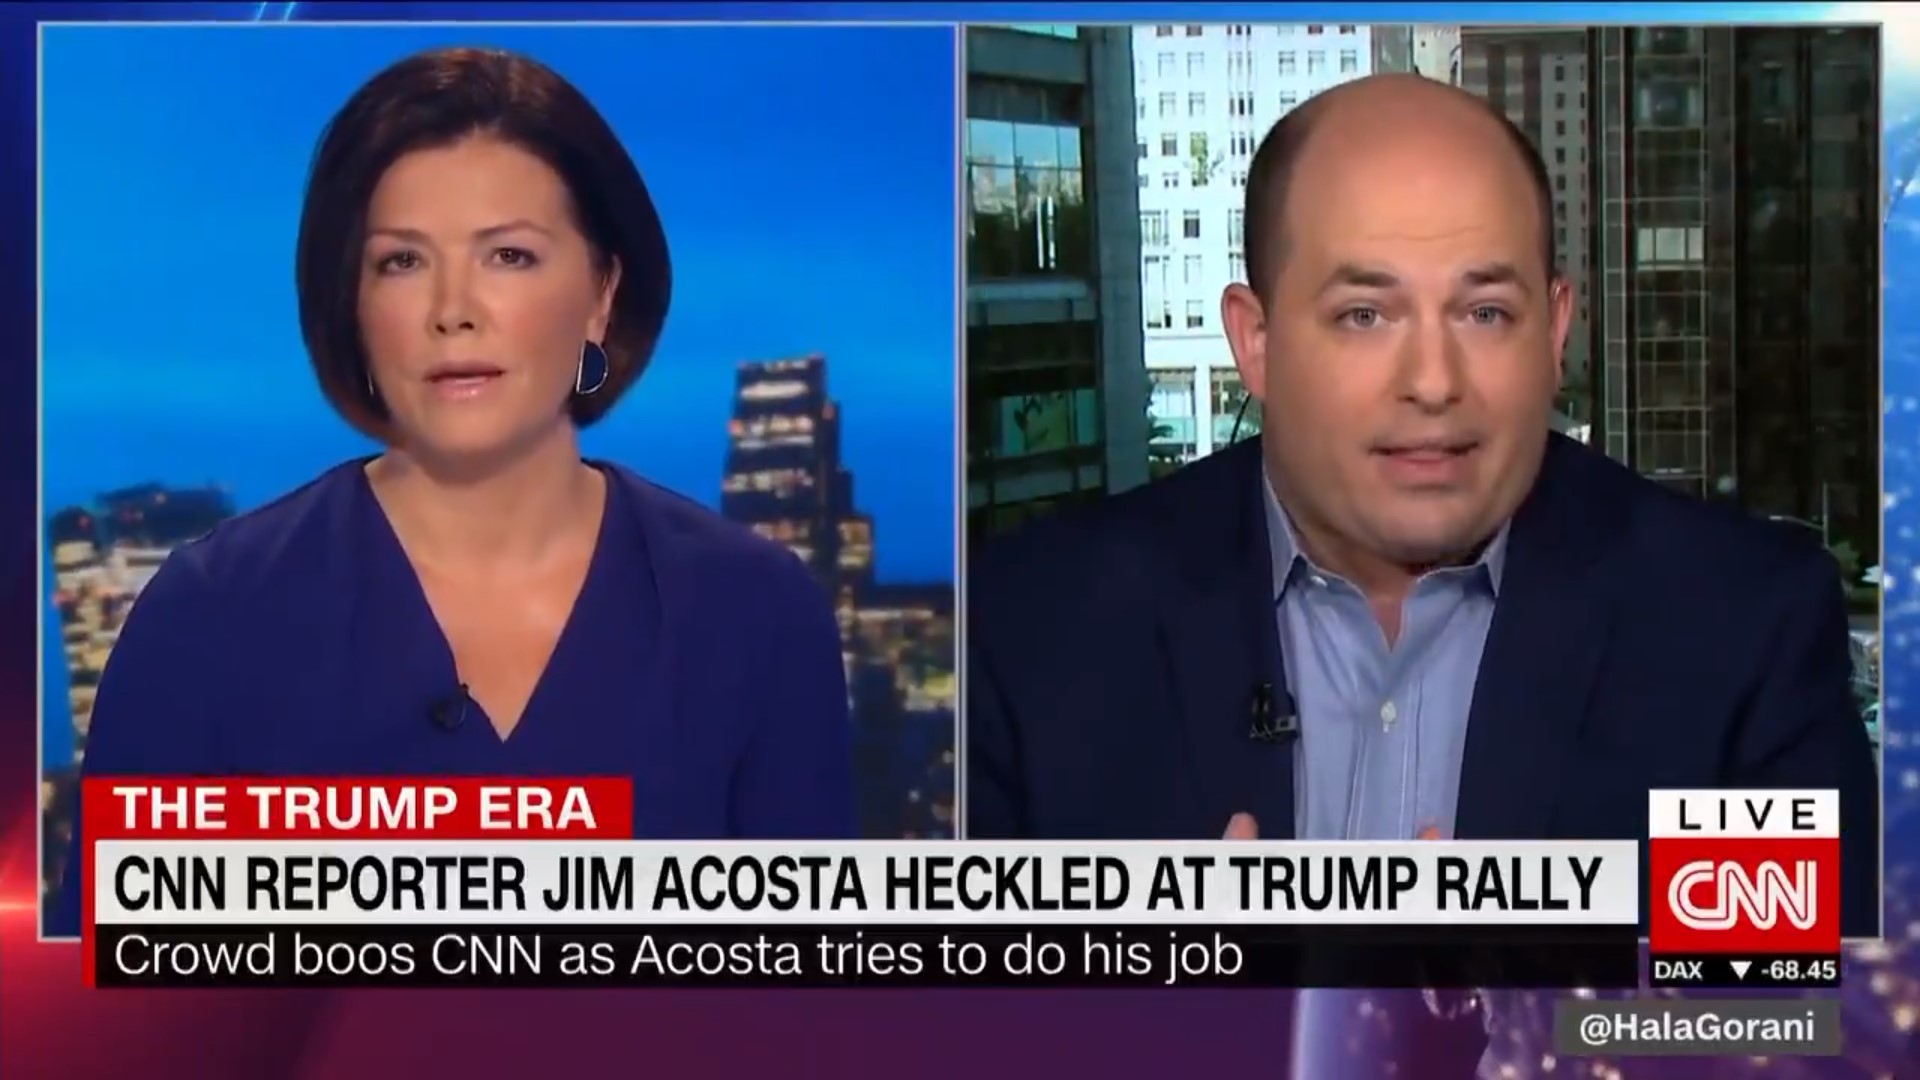 CNN’s Brian Stelter: Trump And His Allies Are Promoting A ‘Hate Movement’ Against The Media